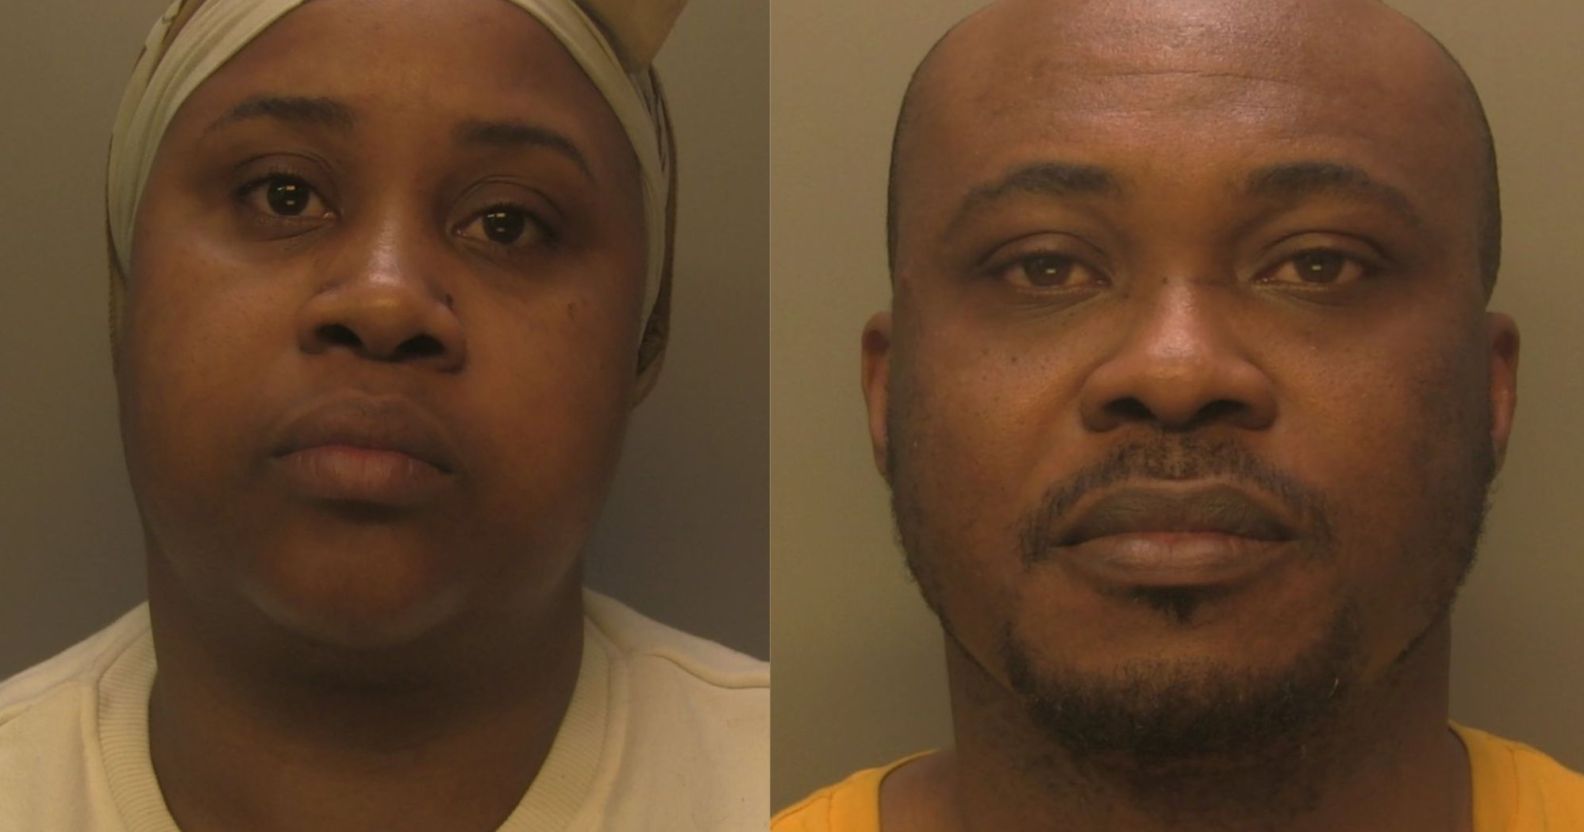 Headshots of Racquel Johnson and Fredrick Diji taken by Surrey Police after the couple were arrested in connection to a romance fraud and money laundering sceme